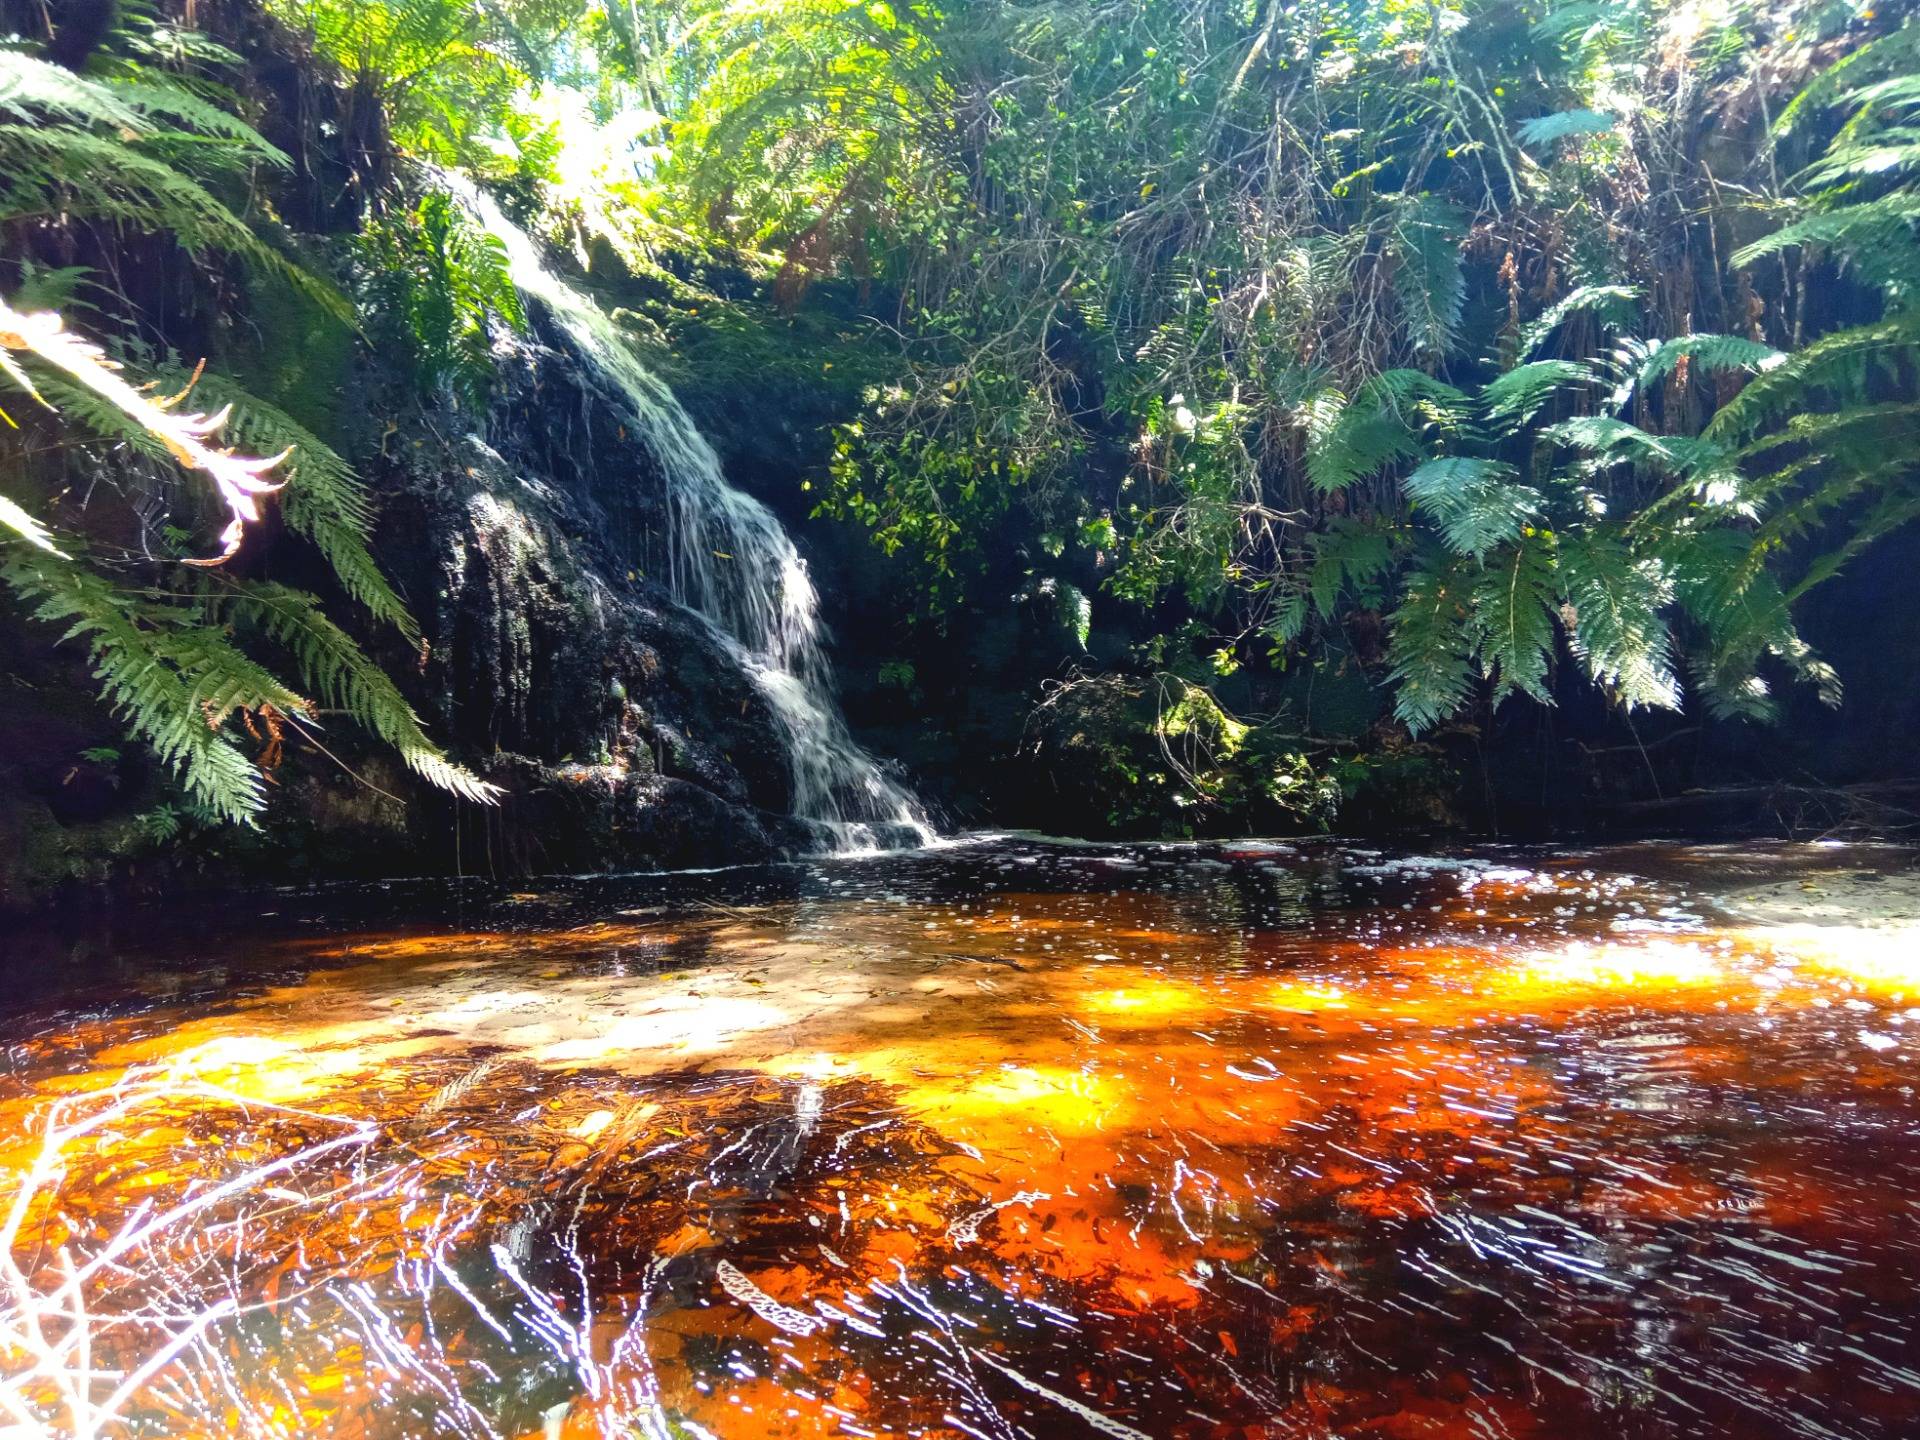 Pools of gold, Knysna forest hike - South coast of Africa